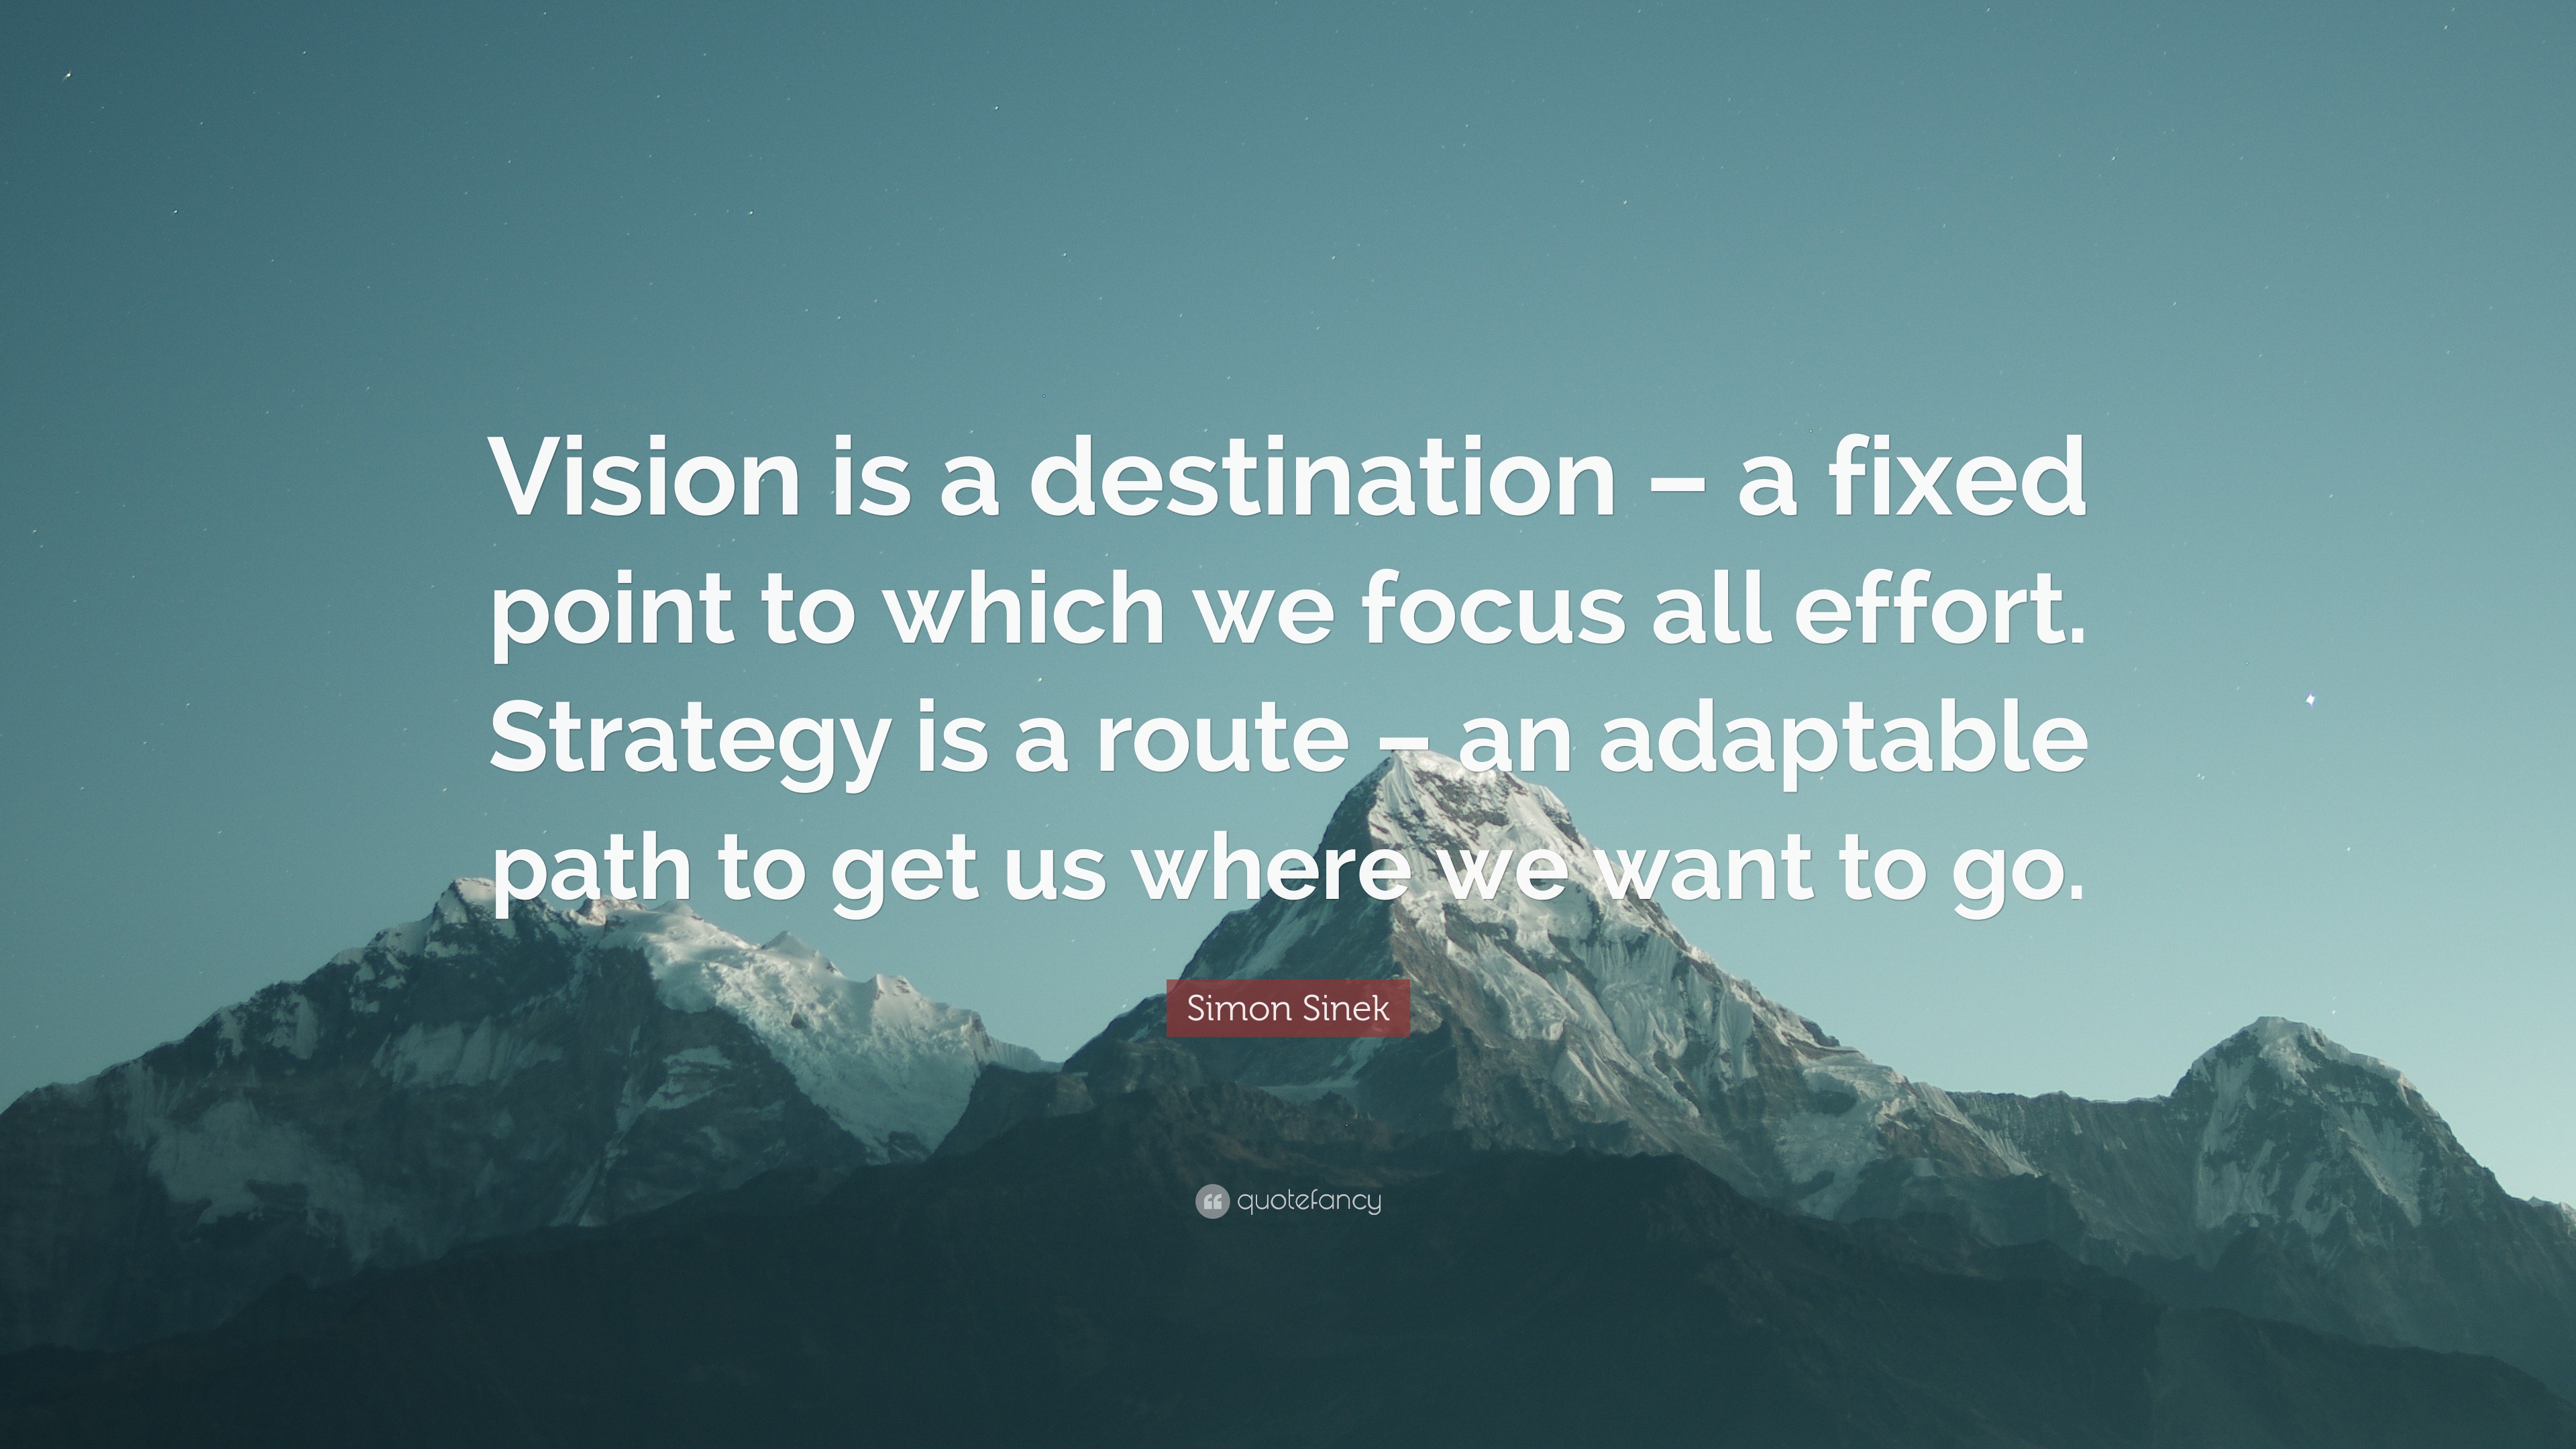 Vision is a destination – a fixed point to which we focus